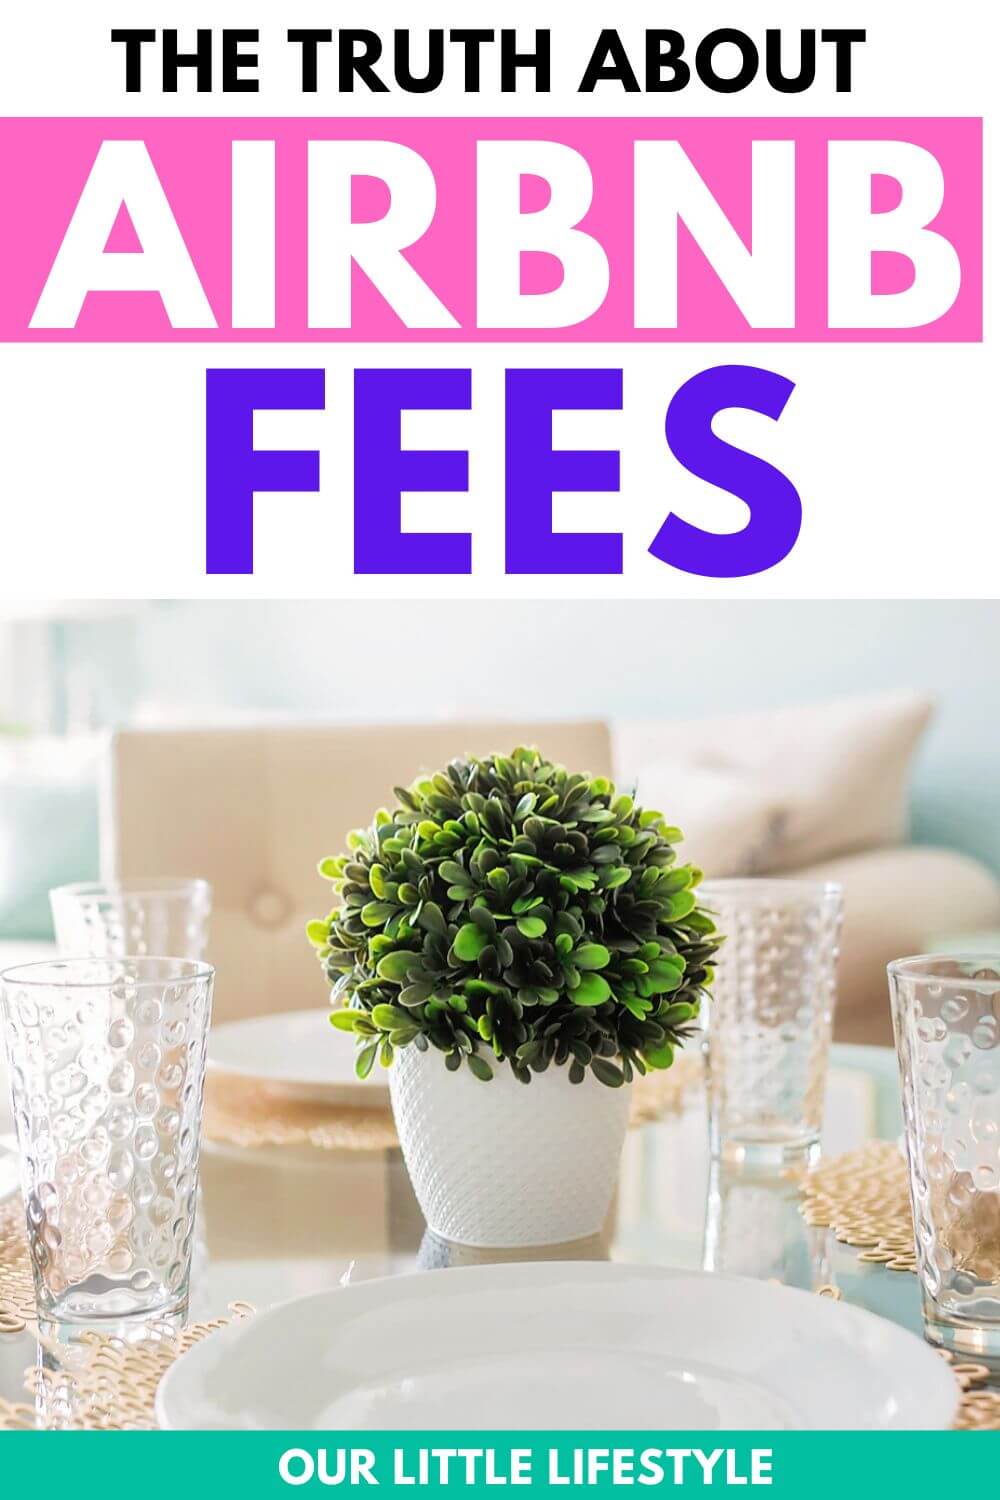 The truth about Airbnb fees